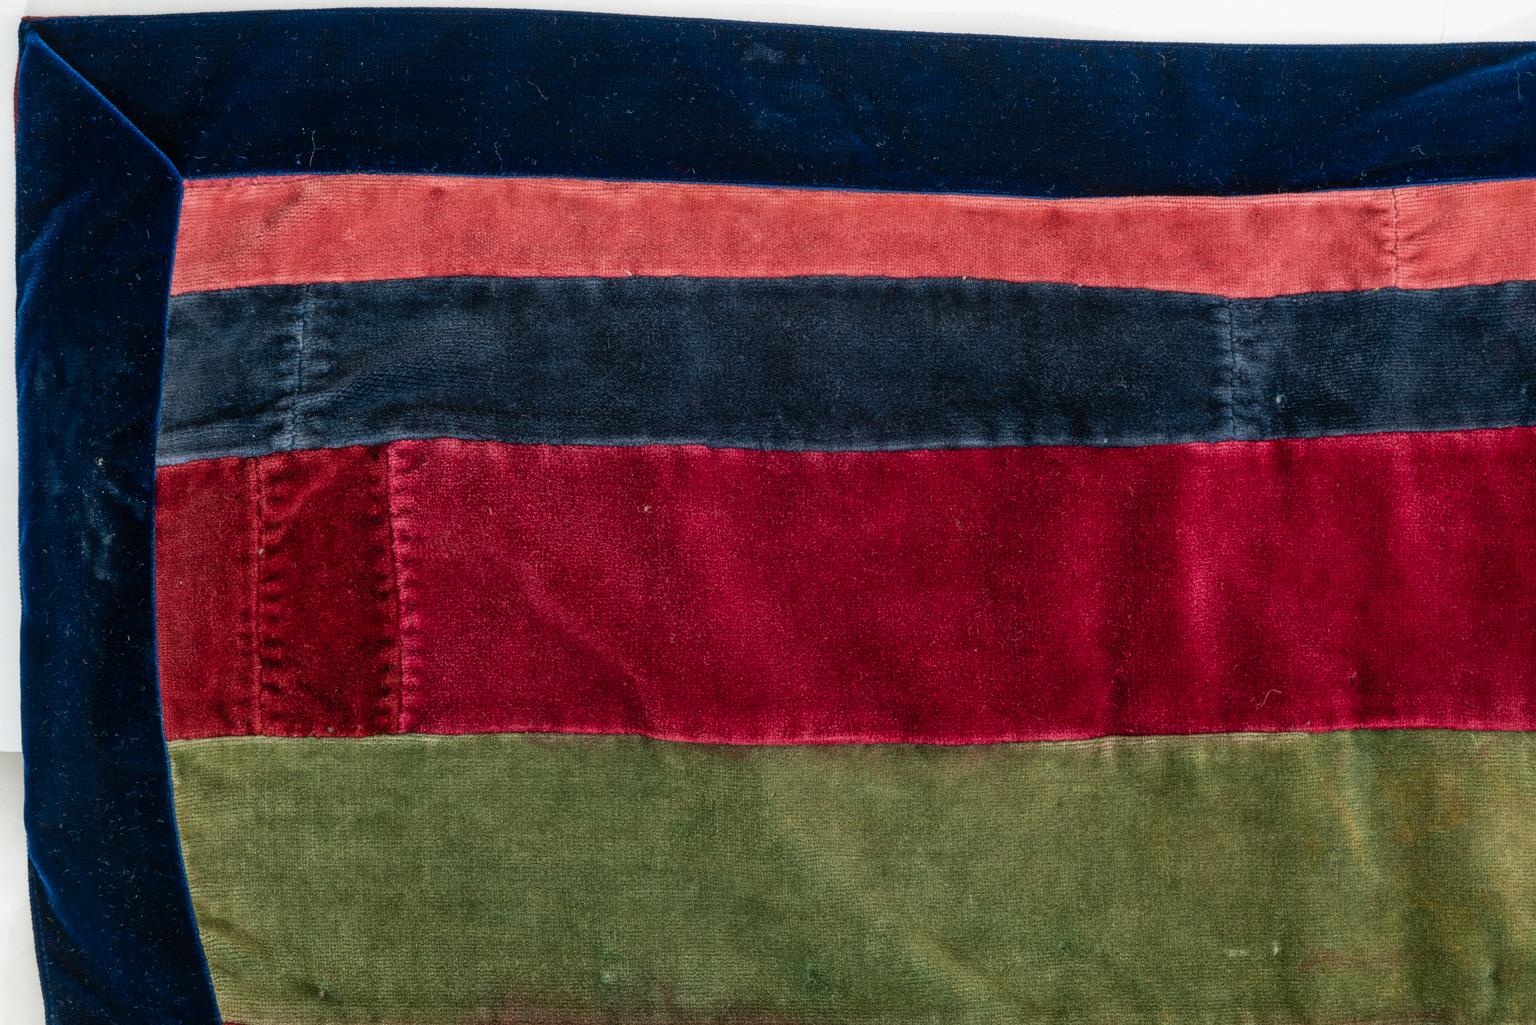 American Velvet Patch Vintage Quilt from California